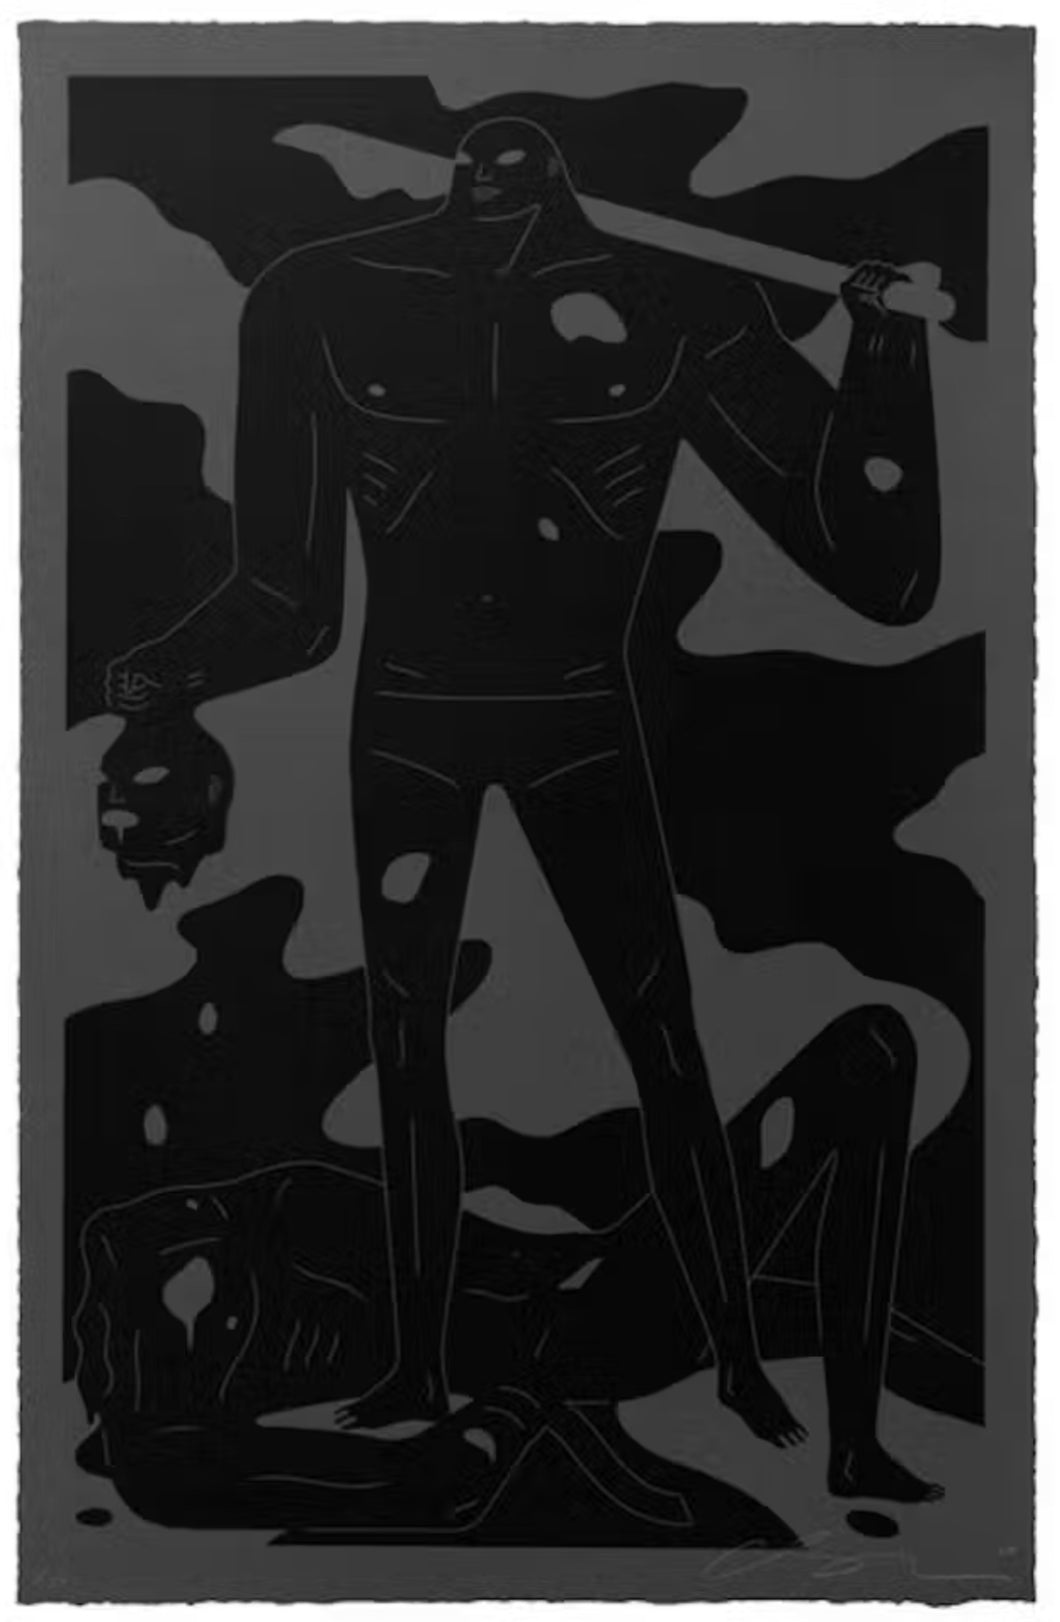 Cleon Peterson “A Perfect Trade”